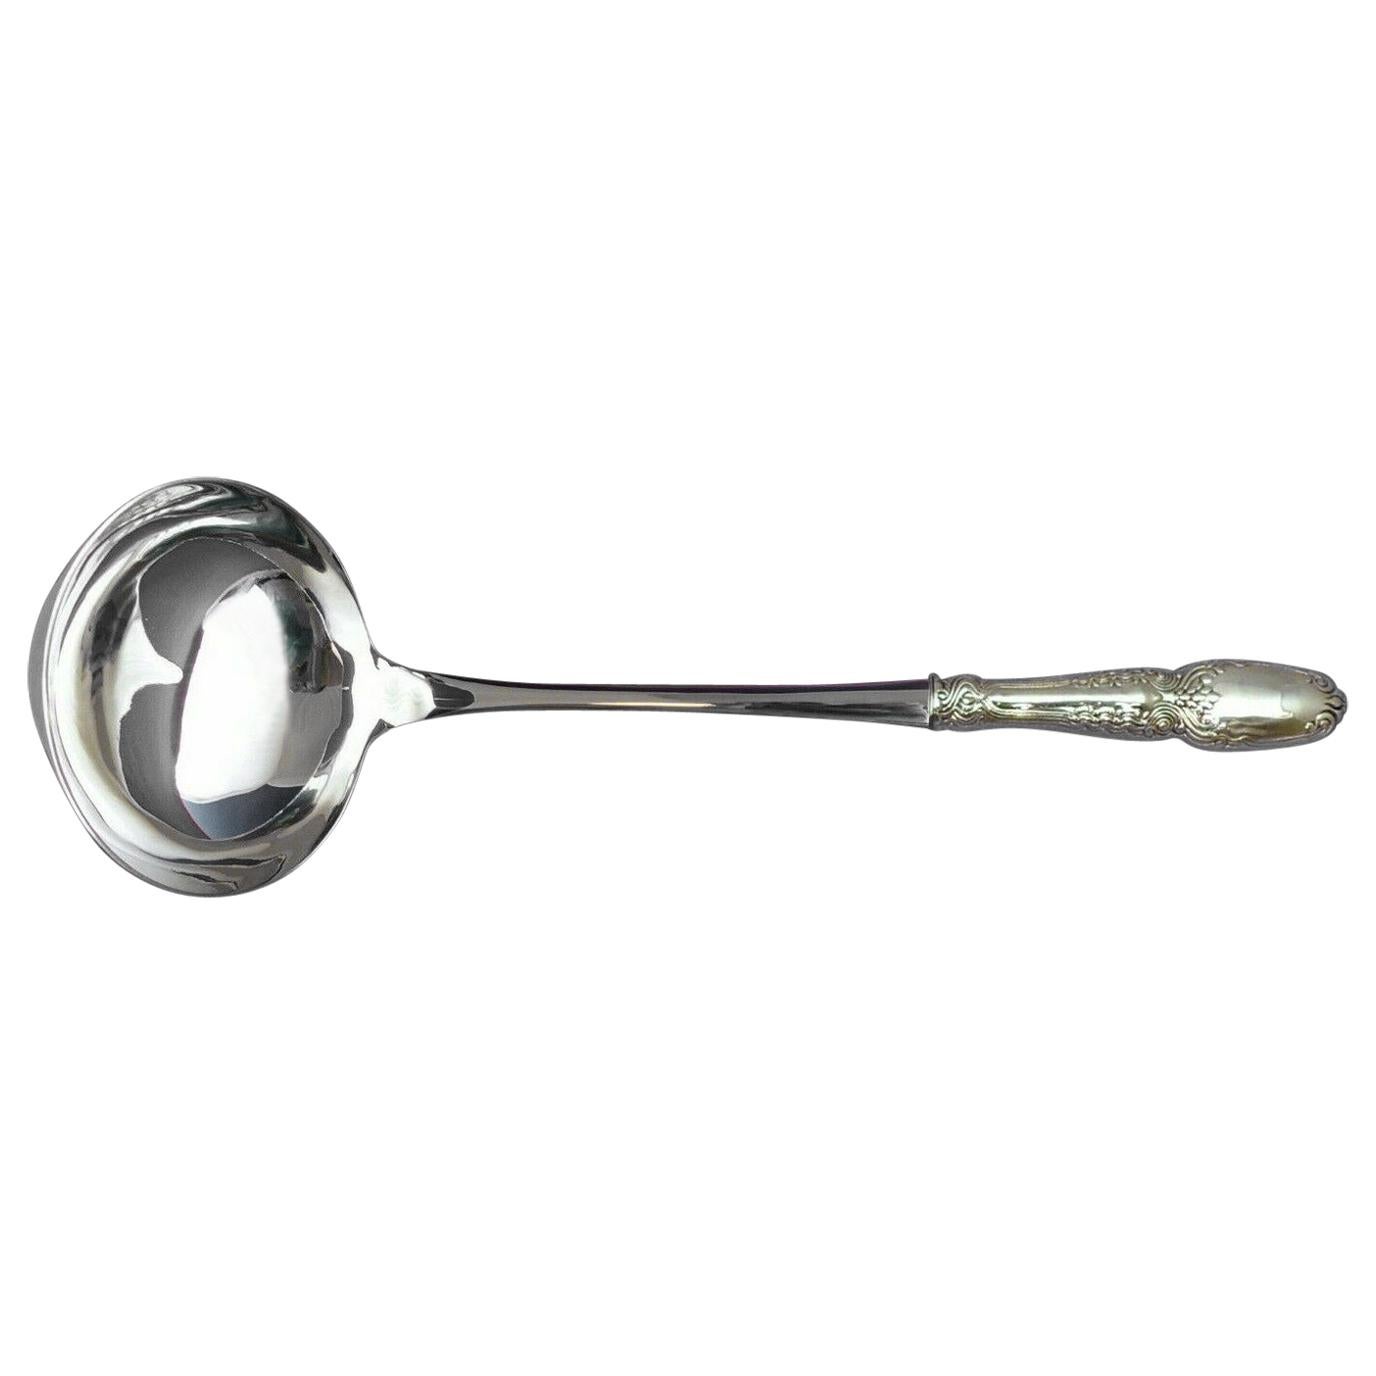 Broom Corn by Tiffany & Co. Sterling Silver Soup Ladle HHWS Custom Made